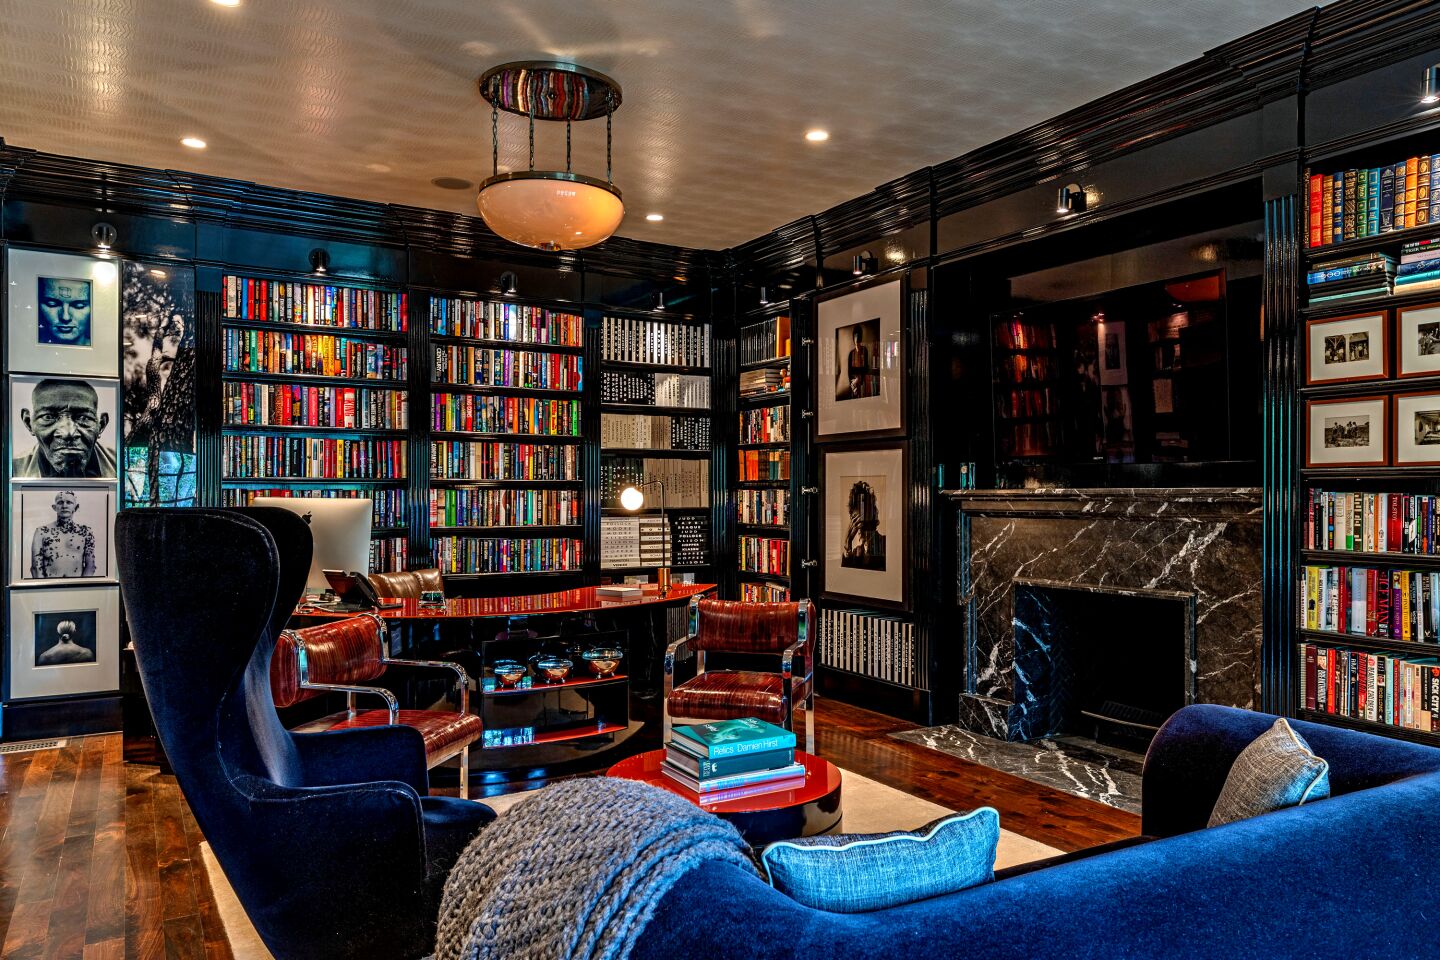 A furnished room with built-in book shelves filled with books and pictures on the wall.